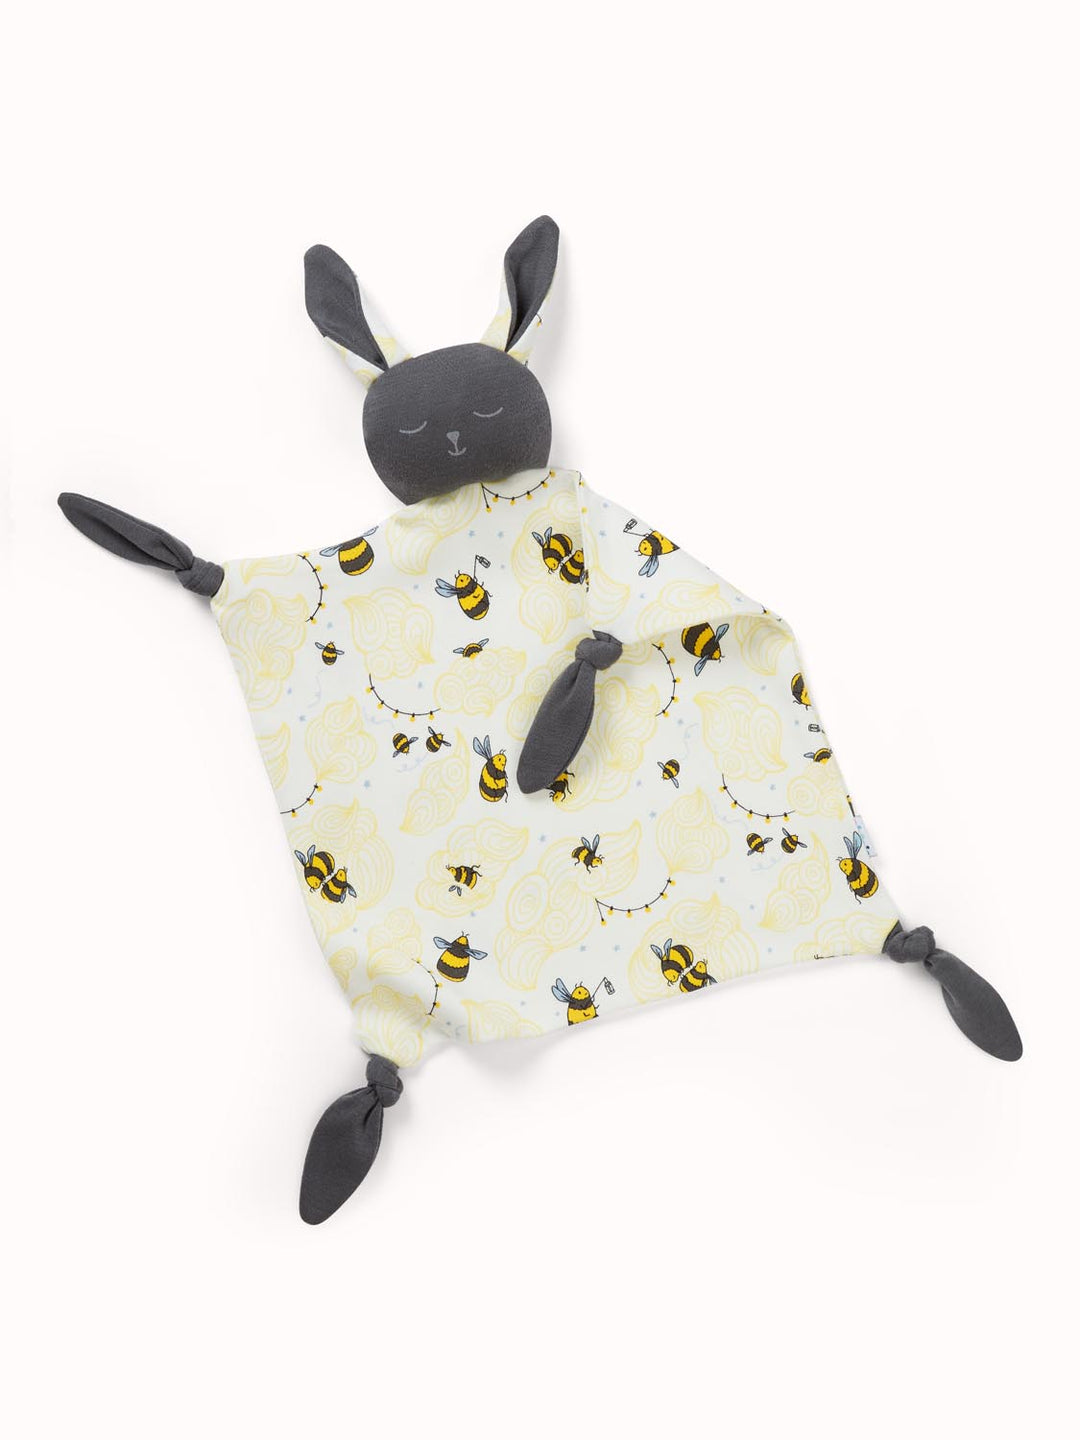 Imperfect Cuddle Bunny Comforter Imperfect Superlove Outlet Bumble